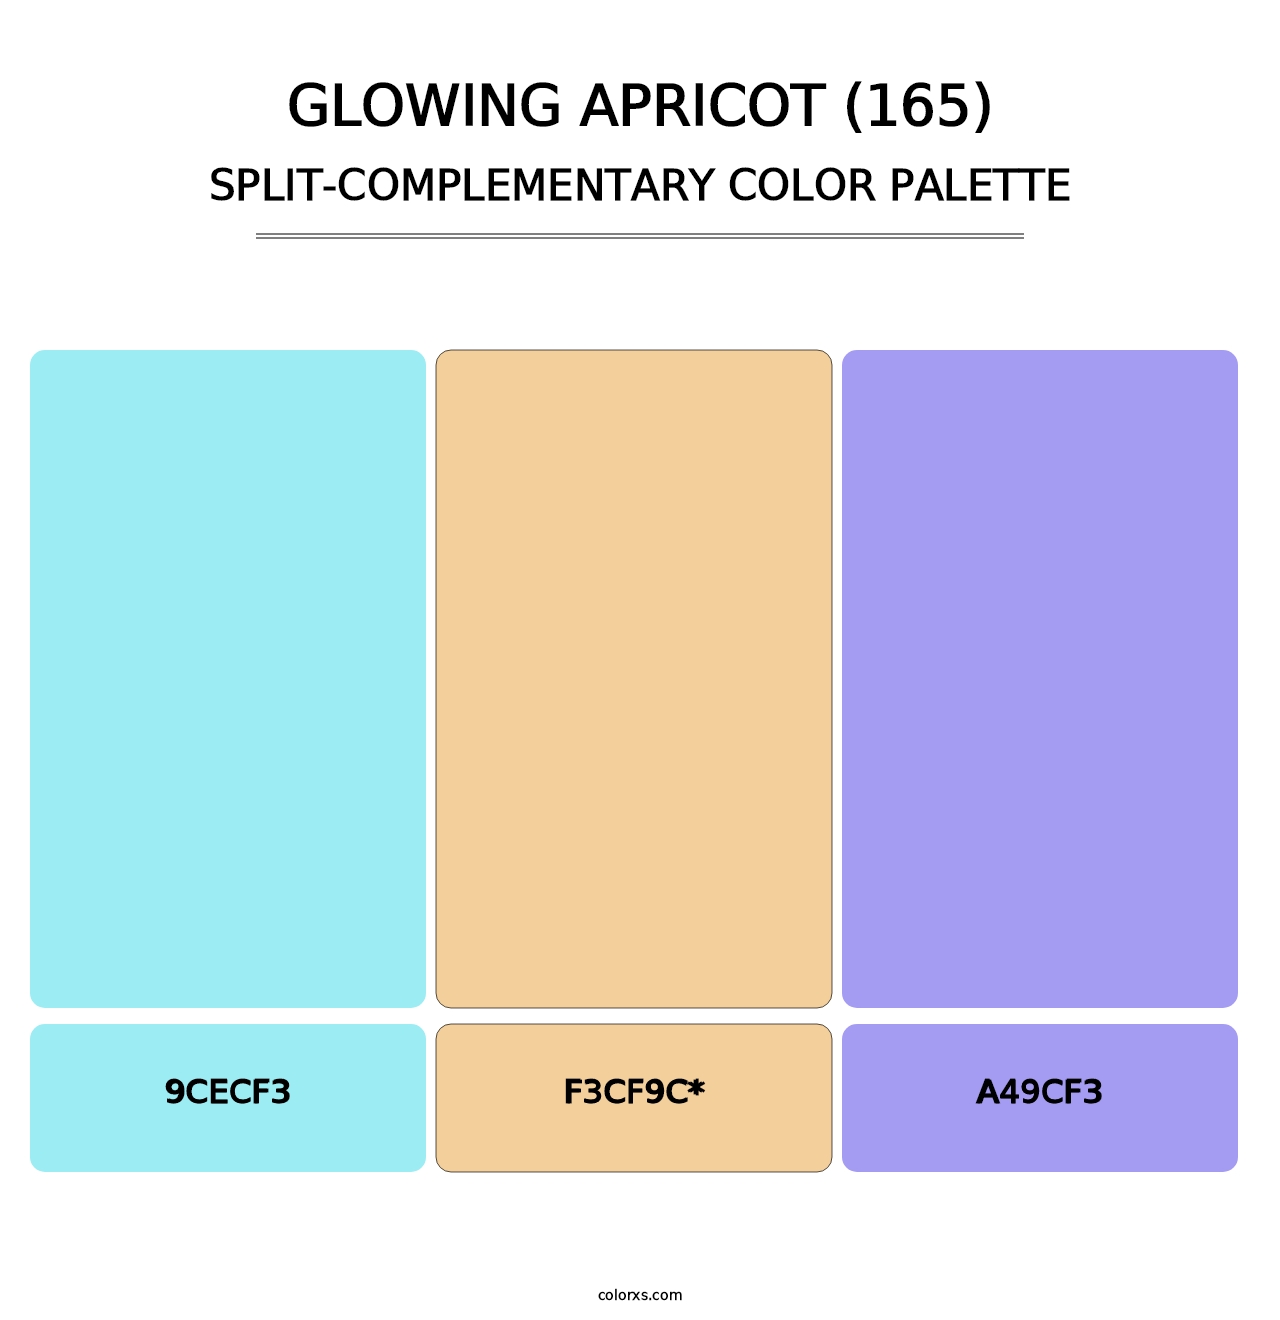 Glowing Apricot (165) - Split-Complementary Color Palette